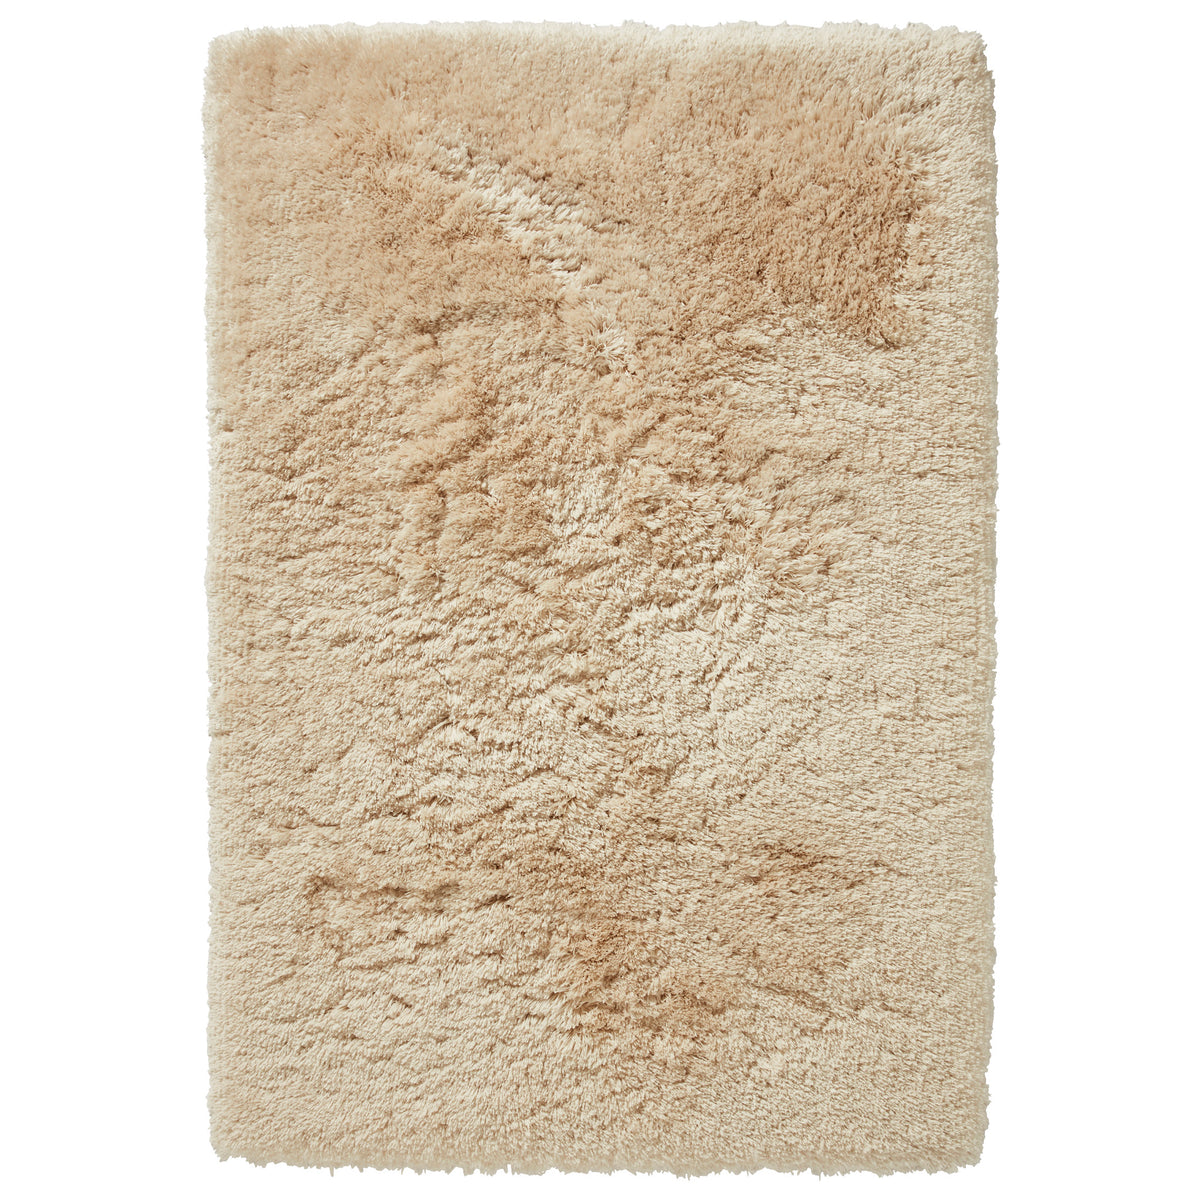 Hatton Cream Hand Tufted Shaggy Rug from Roseland Furniture